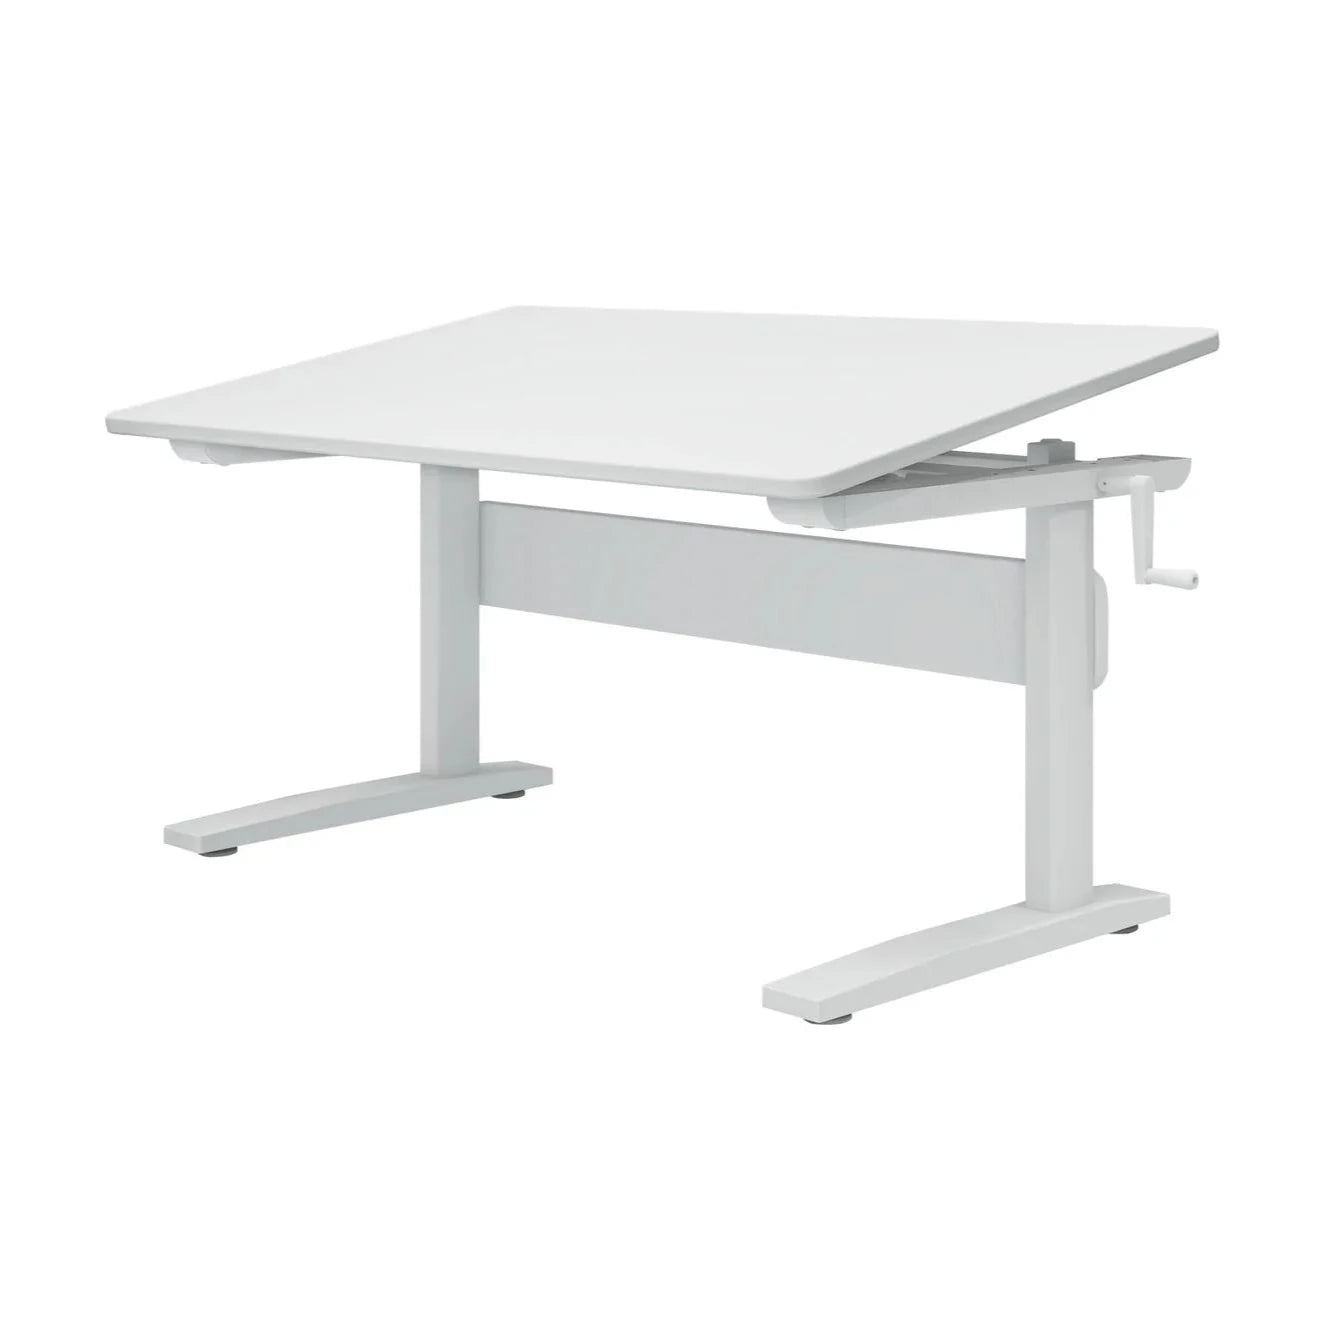 Flexa Classic Adjustable Desk – Available in 3 colours